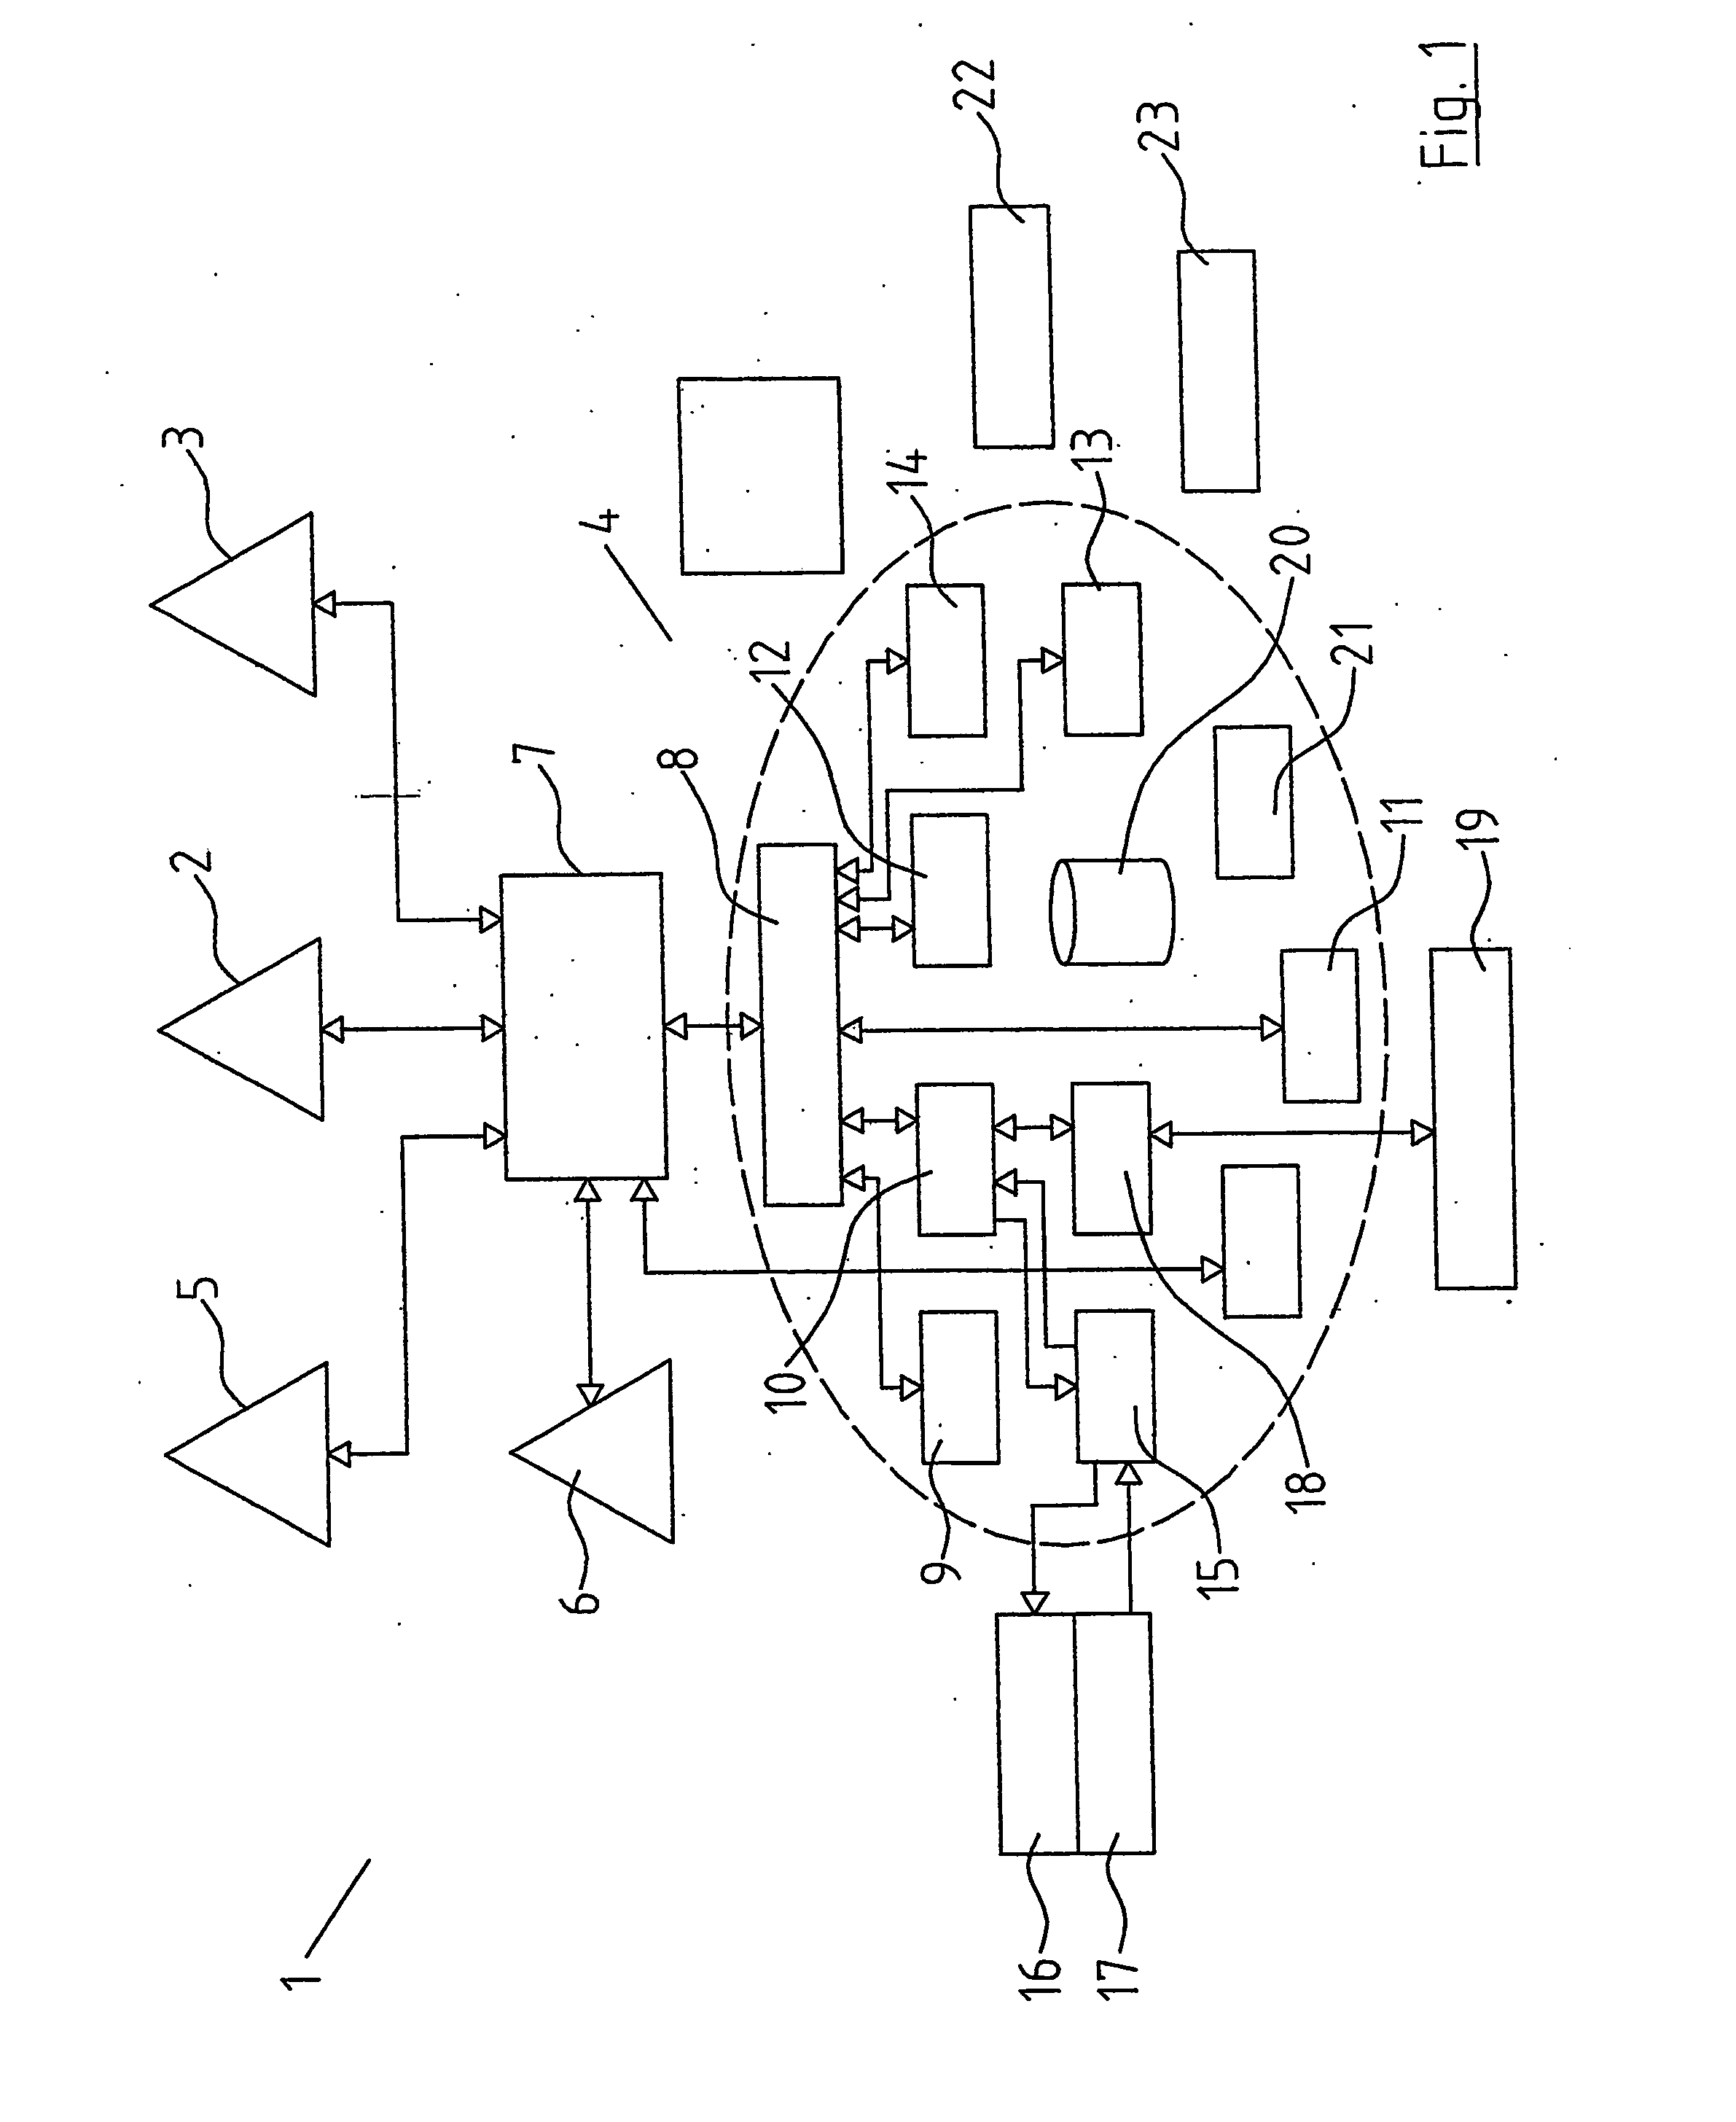 Method of scheduling delivery of goods